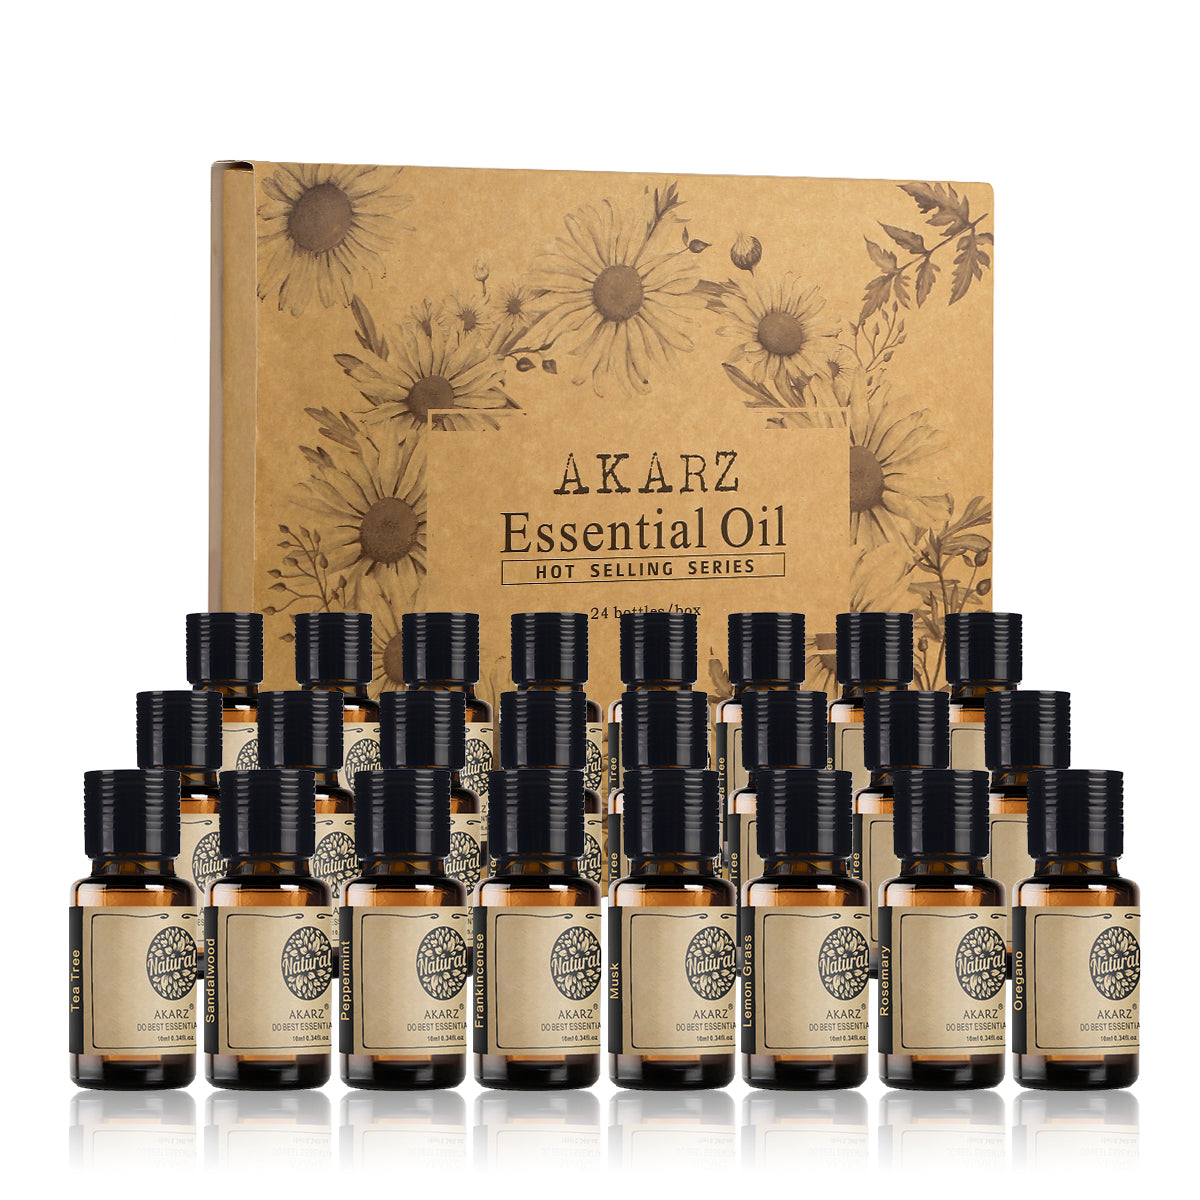 AKARZ Cherry Essential Oil Natural Aromatic for Aromatherapy